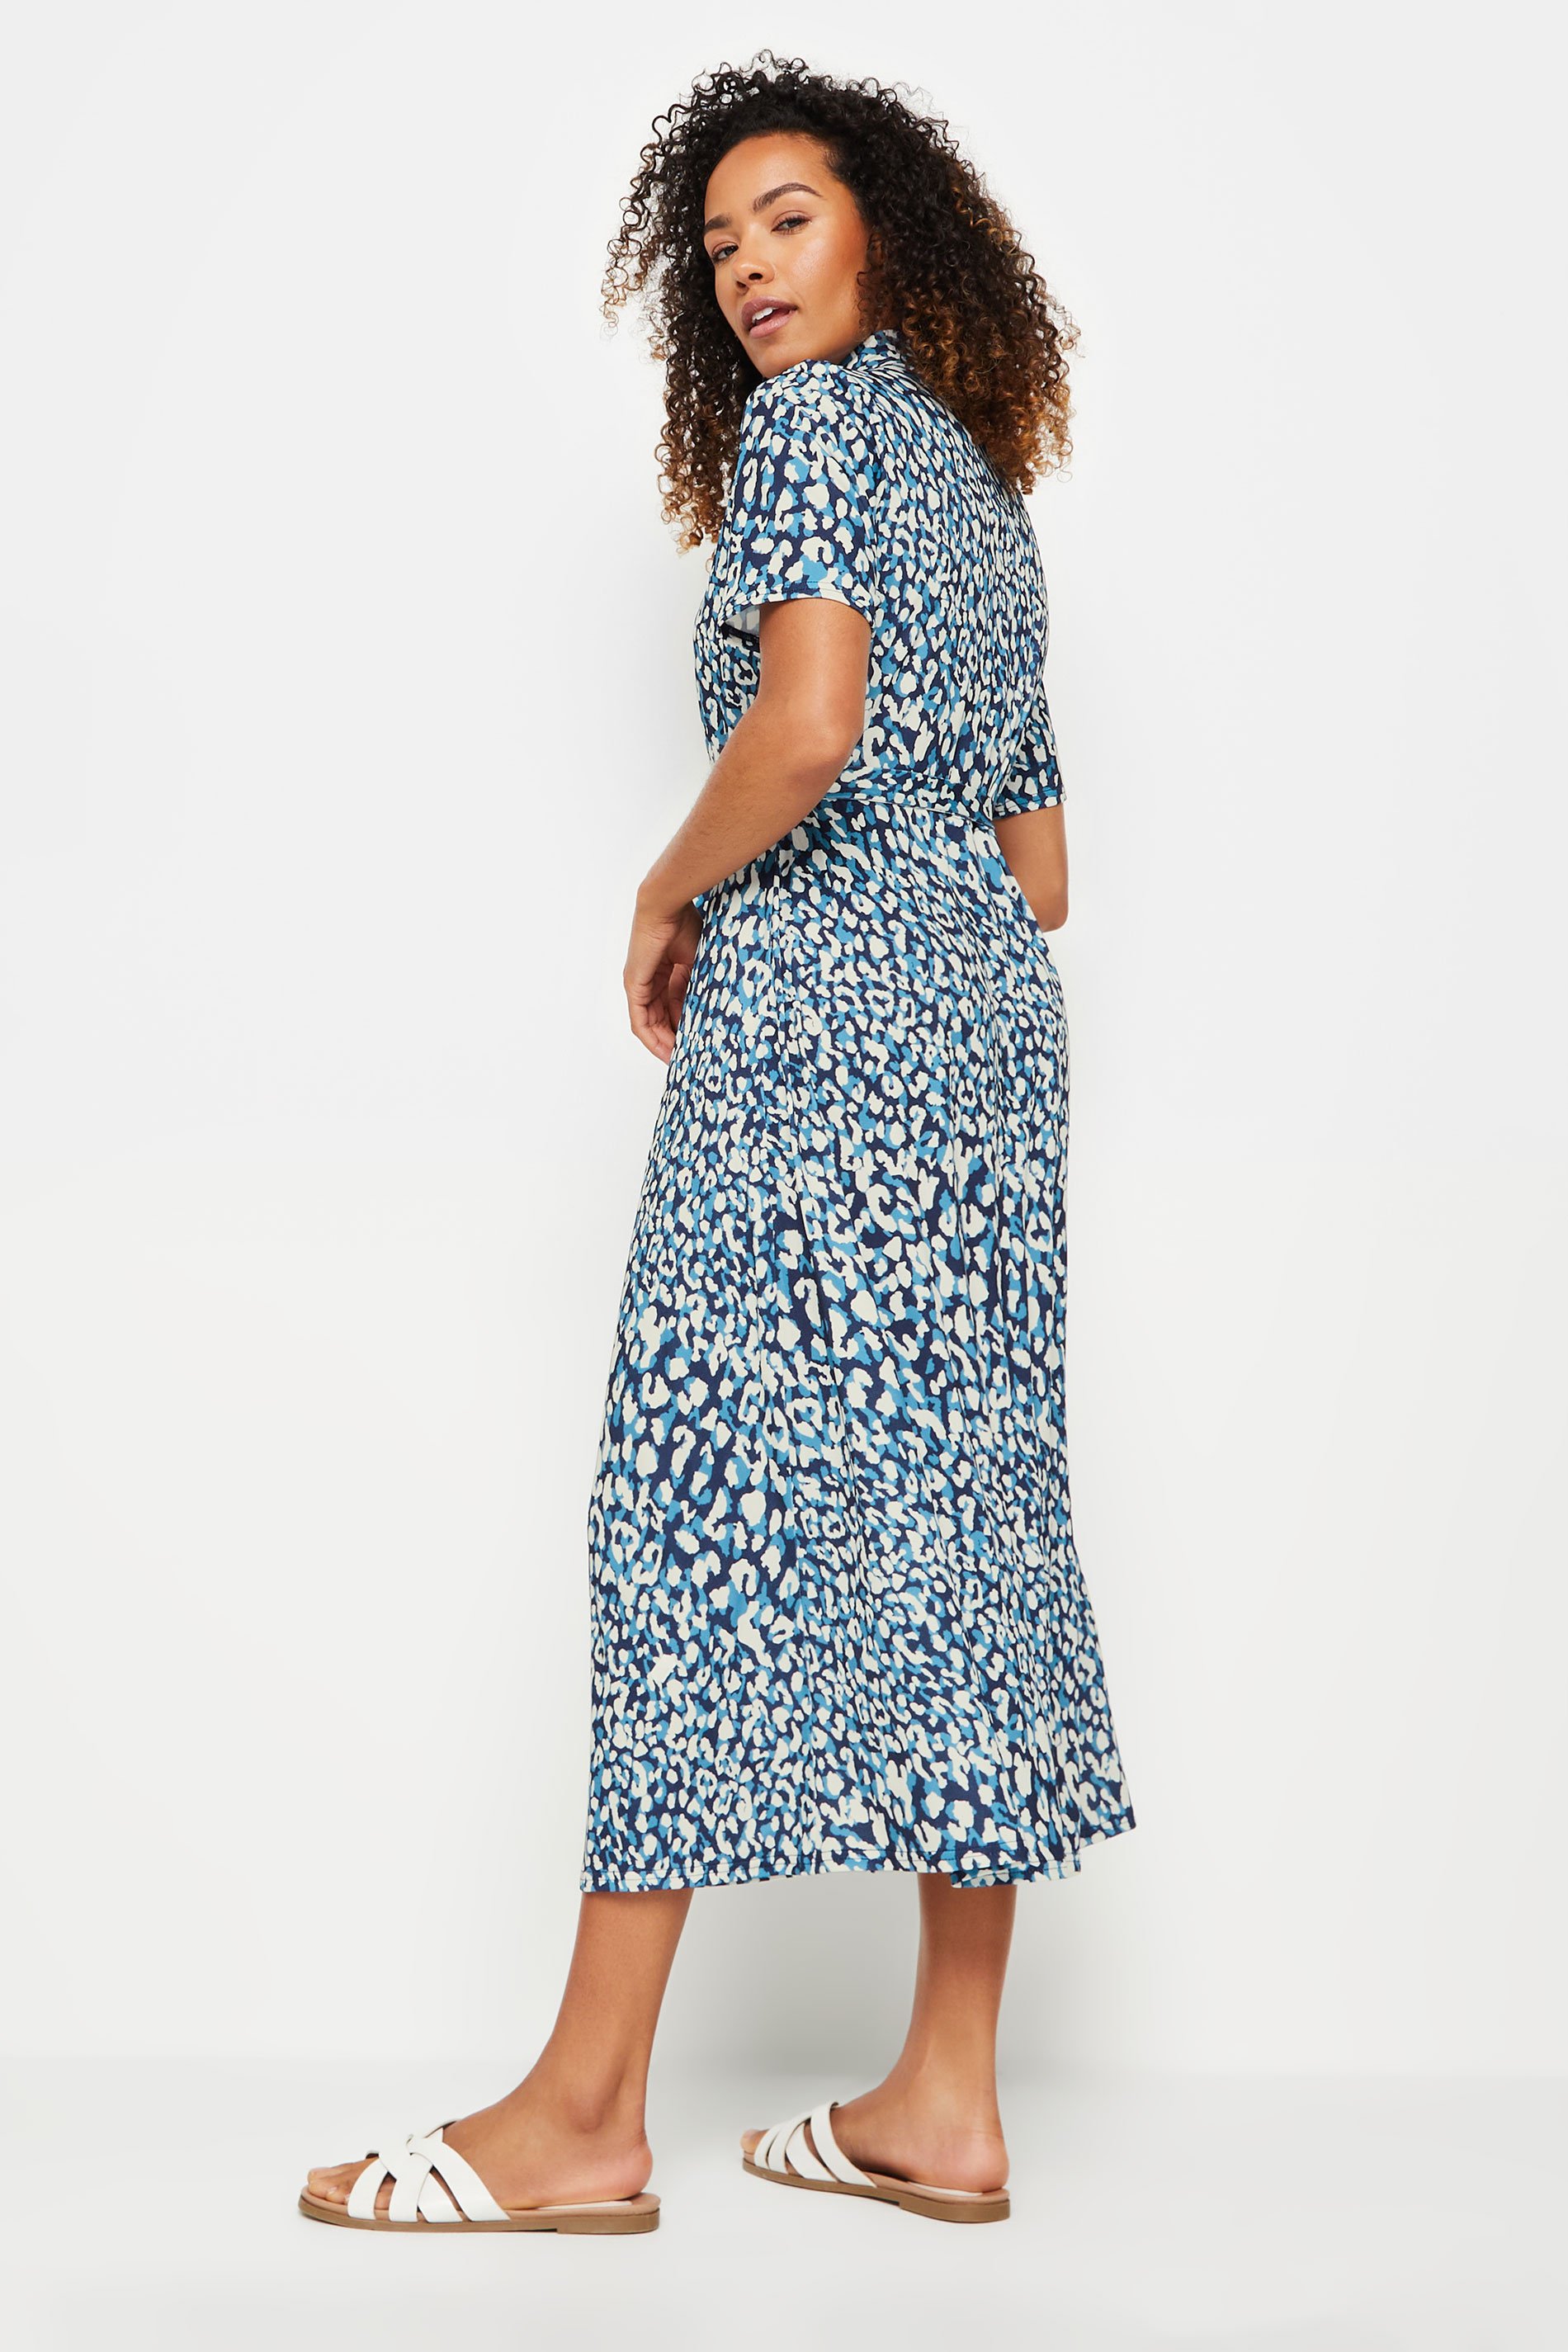 M&Co Blue Abstract Print Collared Midaxi Dress | M&Co 3